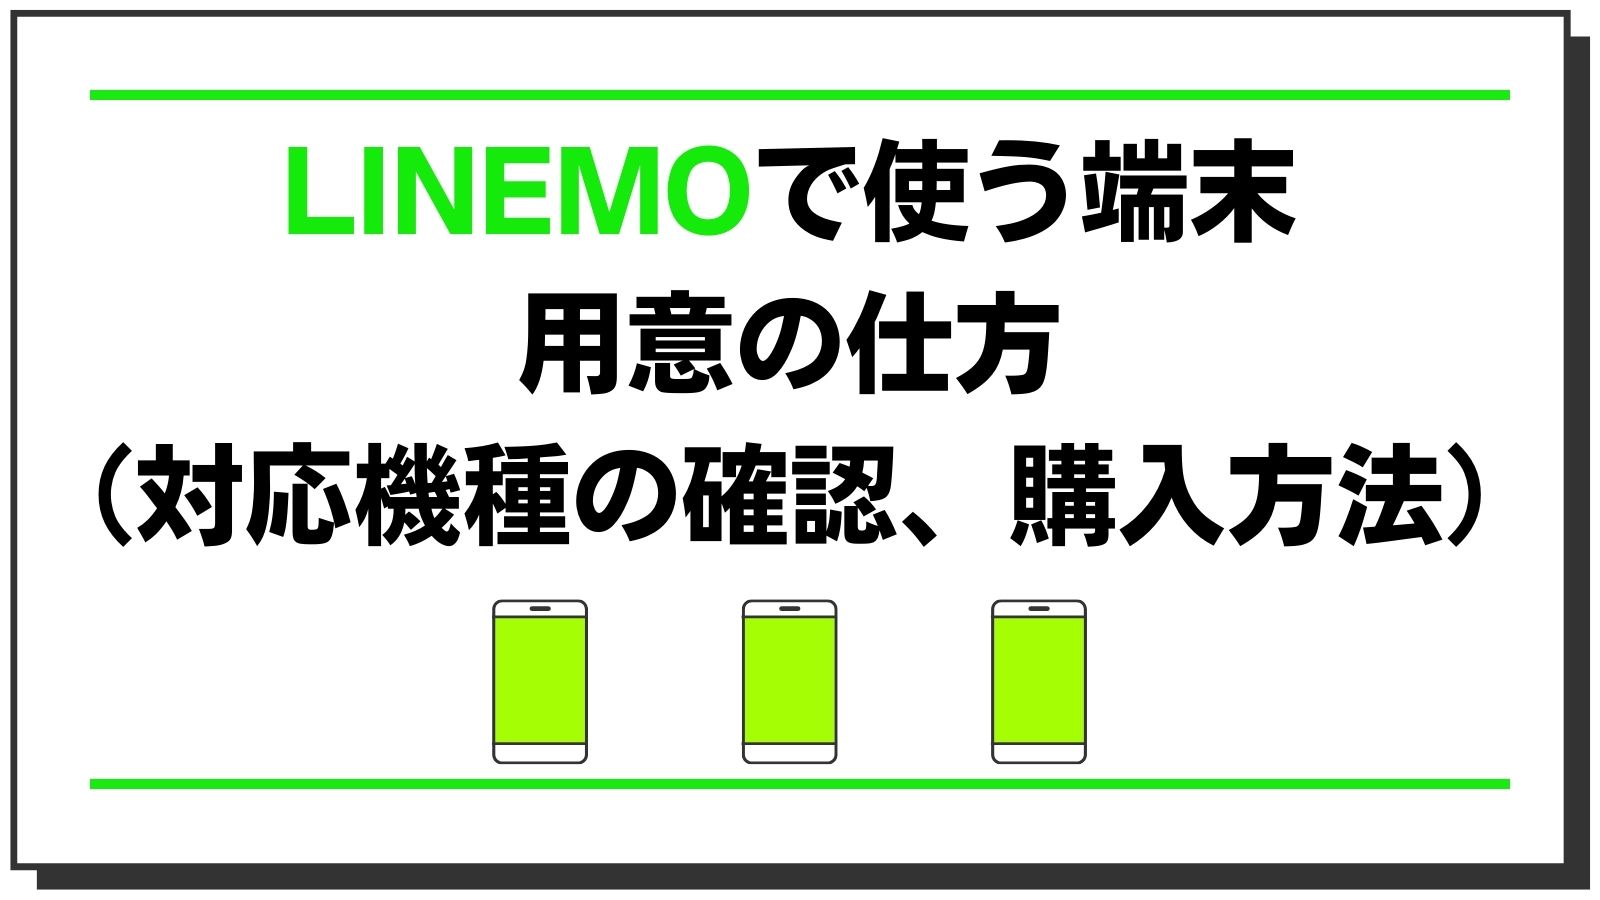 LINEMOで使う端末の用意の仕方（対応機種の確認、購入方法）